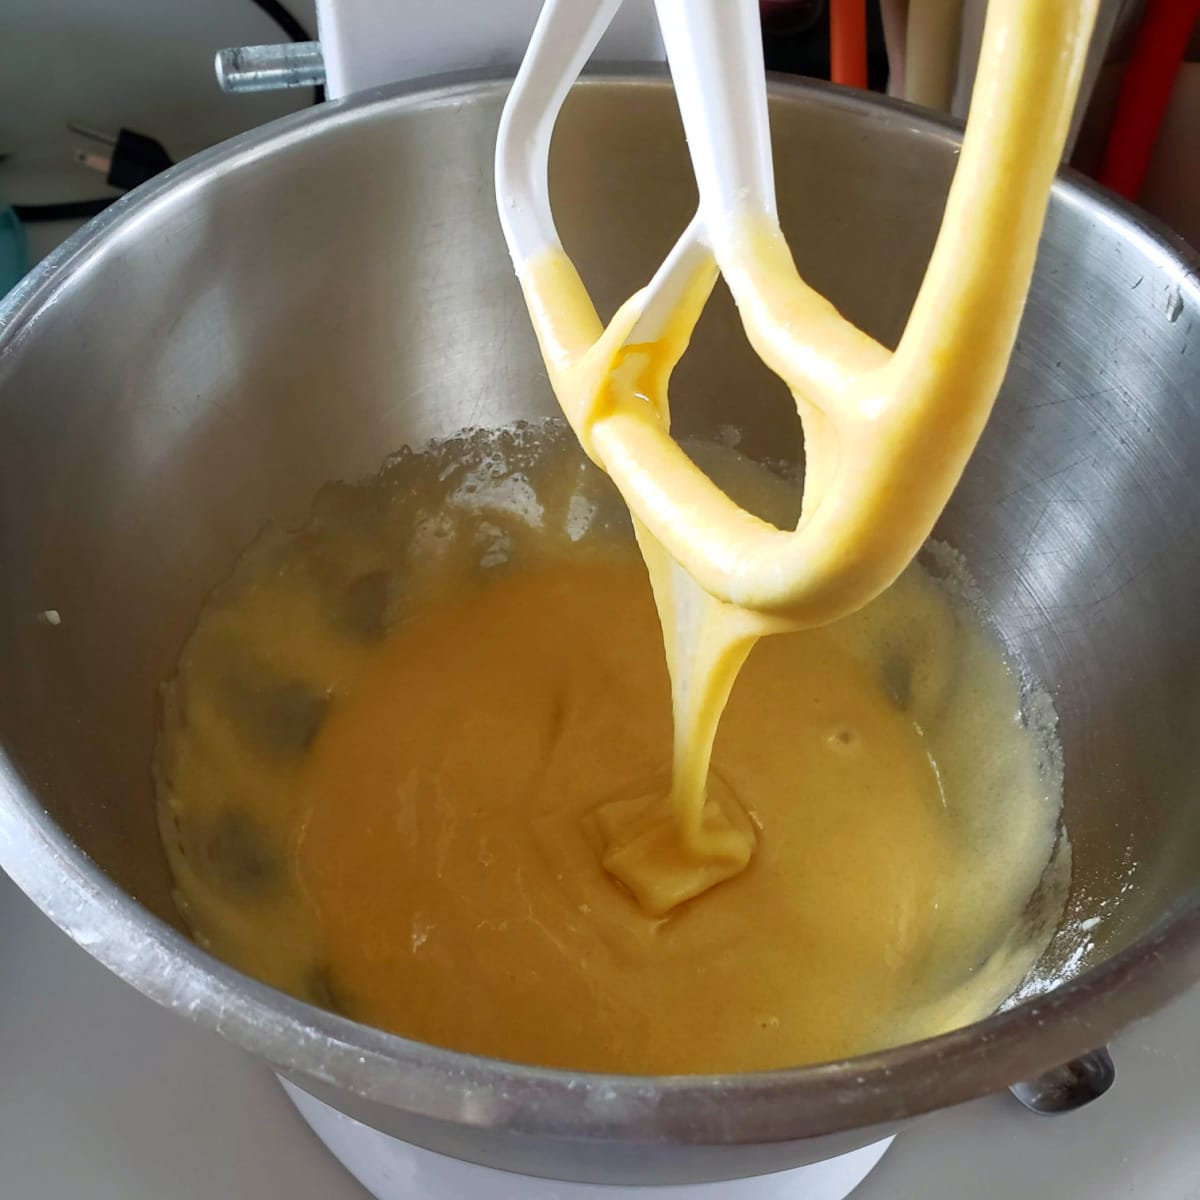 Batter is loose before the flour is added